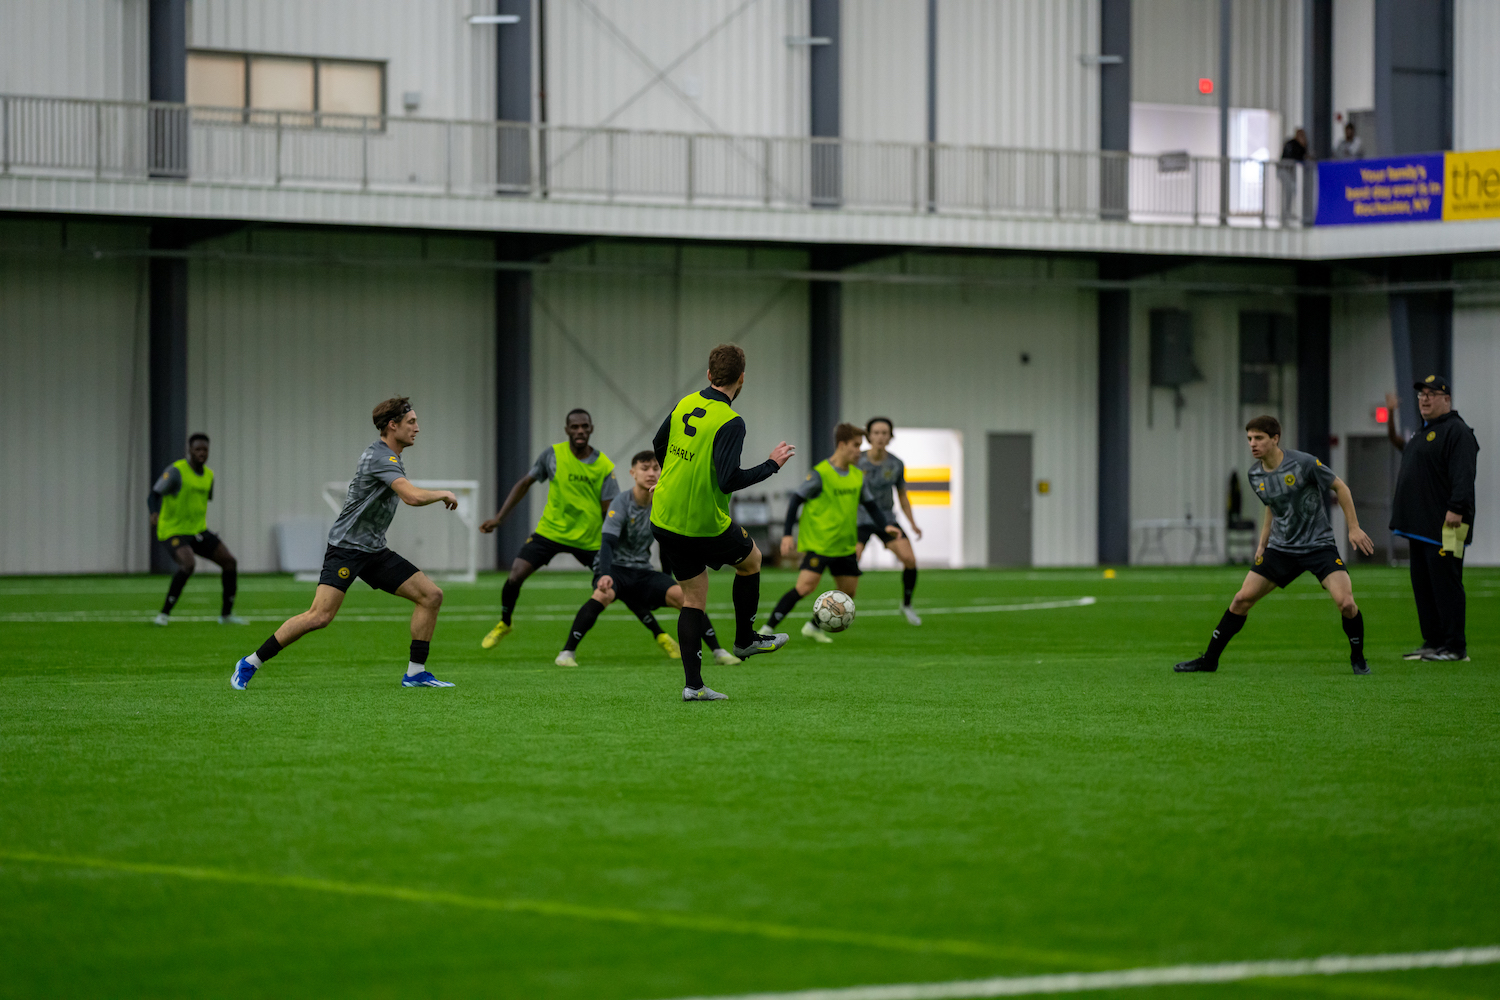 Preseason training begins for Hounds' 25th year featured image